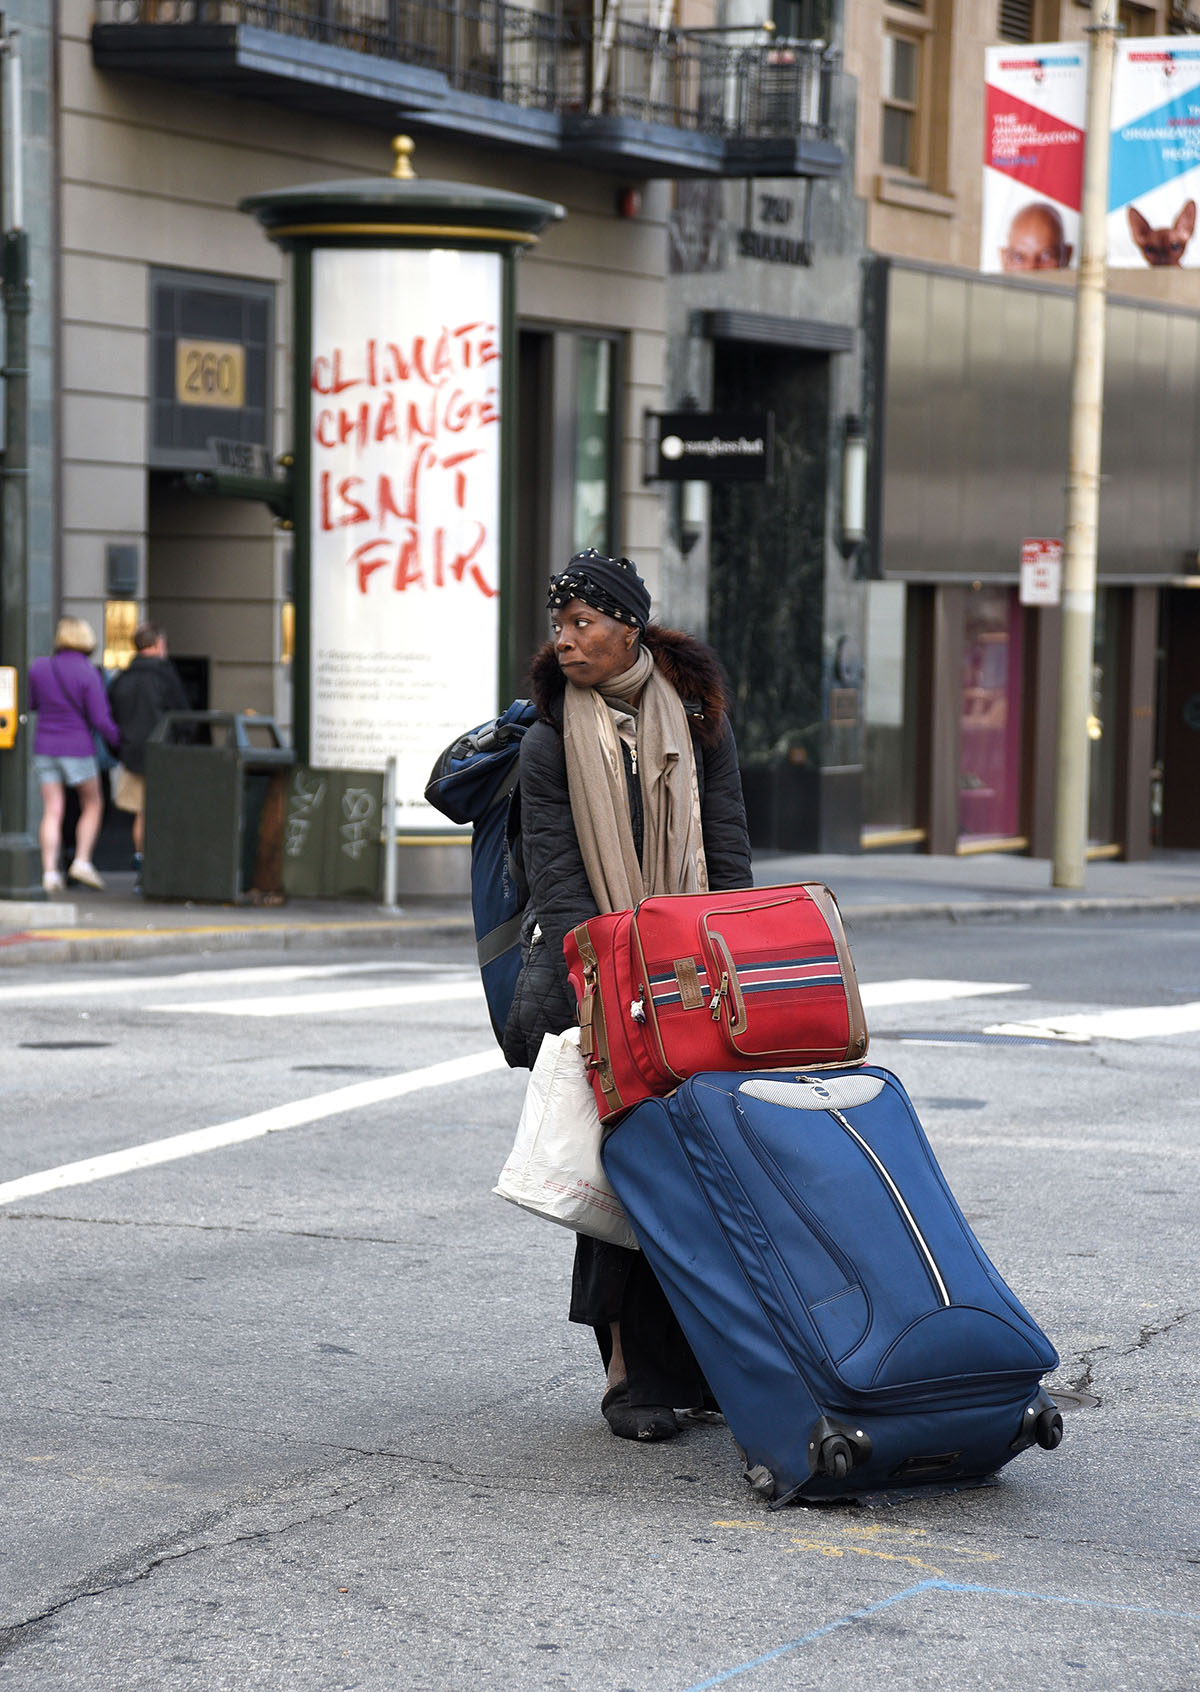 SAN FRANCISCO, CALIFORNIA - SEPTEMBER 12, 2018: A woman drags her possessions packed into suitcases and a backpack across a busy intersection in San Francisco, California. (Photo by Robert Alexander/Getty Images)